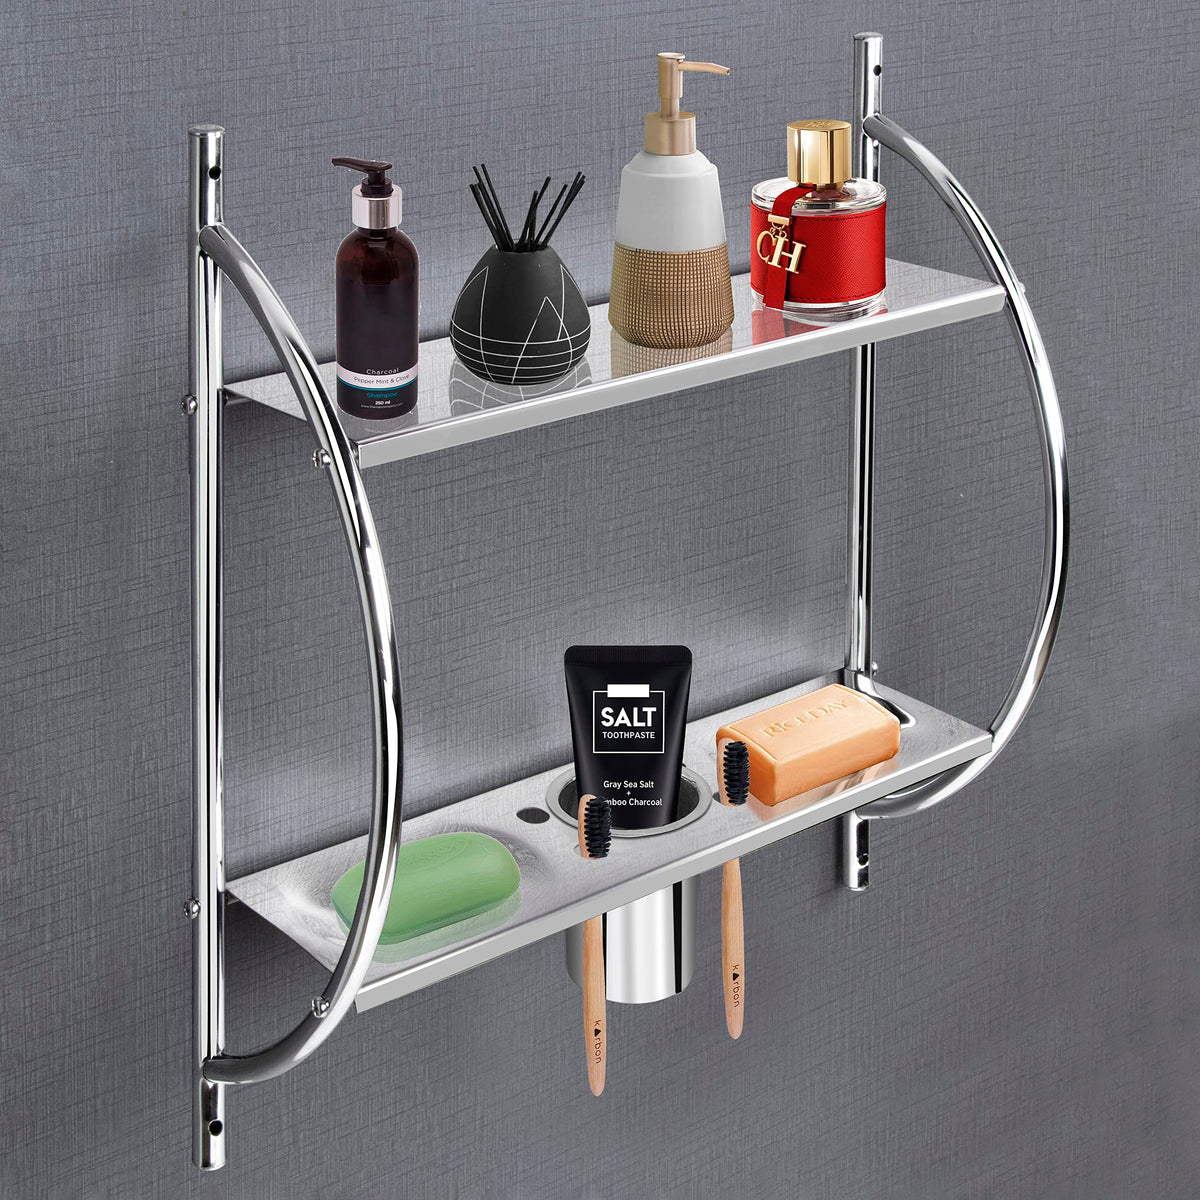 Plantex Stainless Steel 2 Tier Multipurpose Bathroom Shelf/Rack with Double Soap Dish and Tumbler Holder/Bathroom Accessories - Wall Mount (Chrome-Silver)